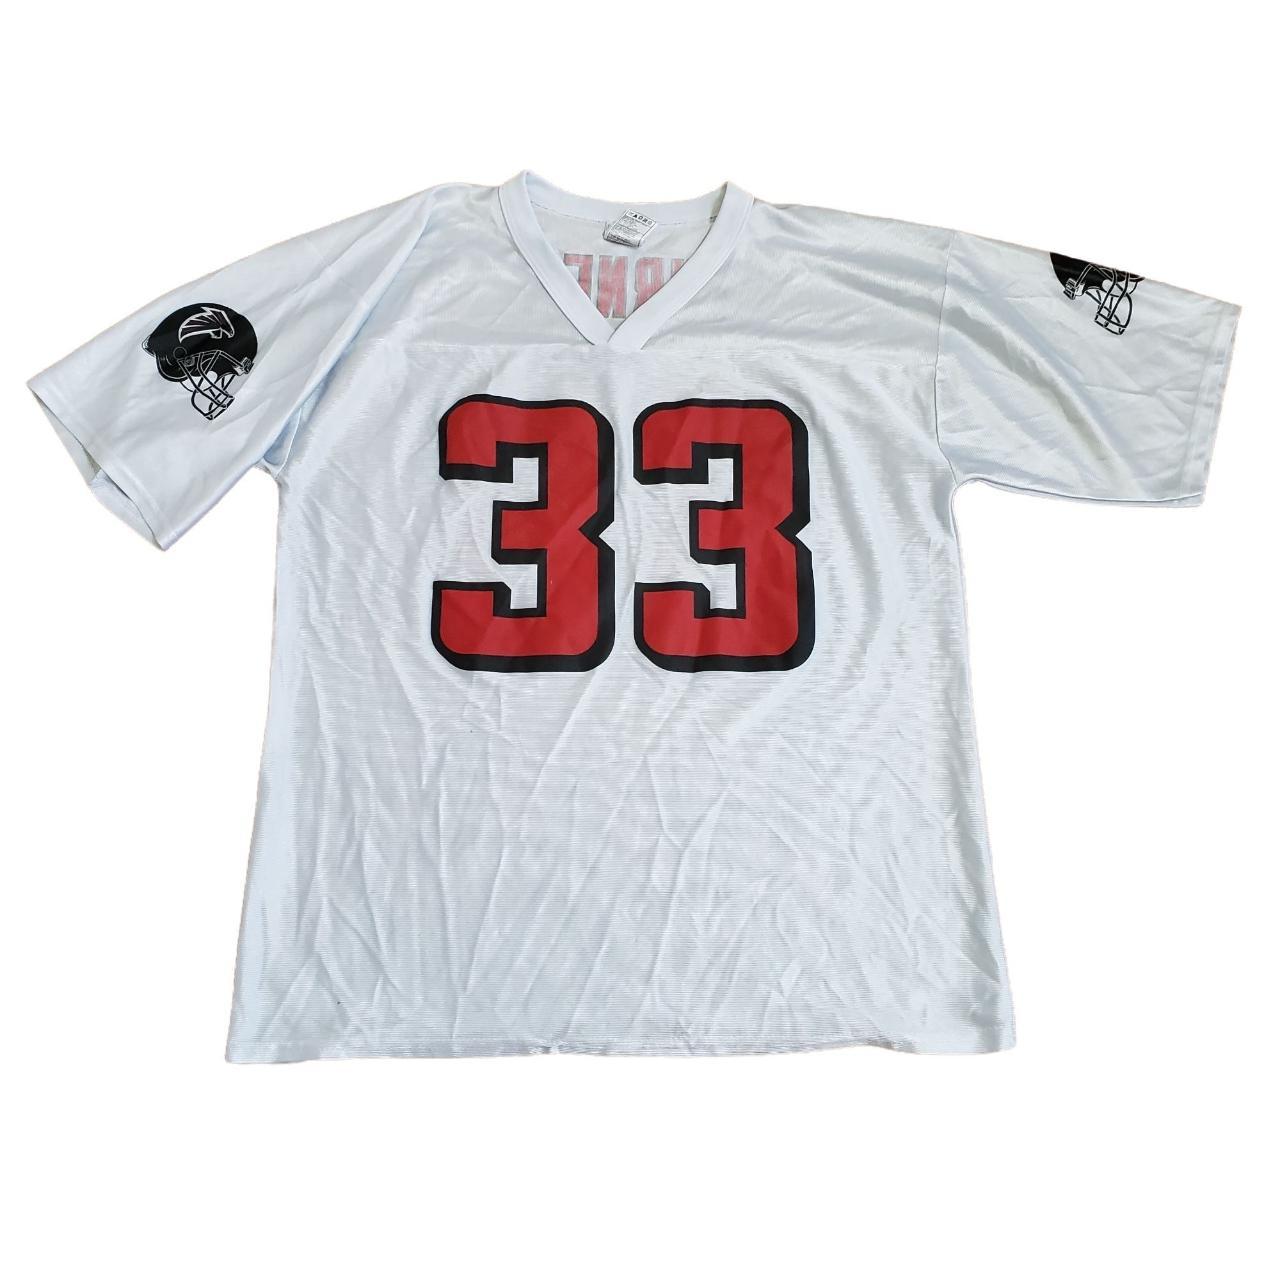 Product Image 1 - NFL. White jersey with red